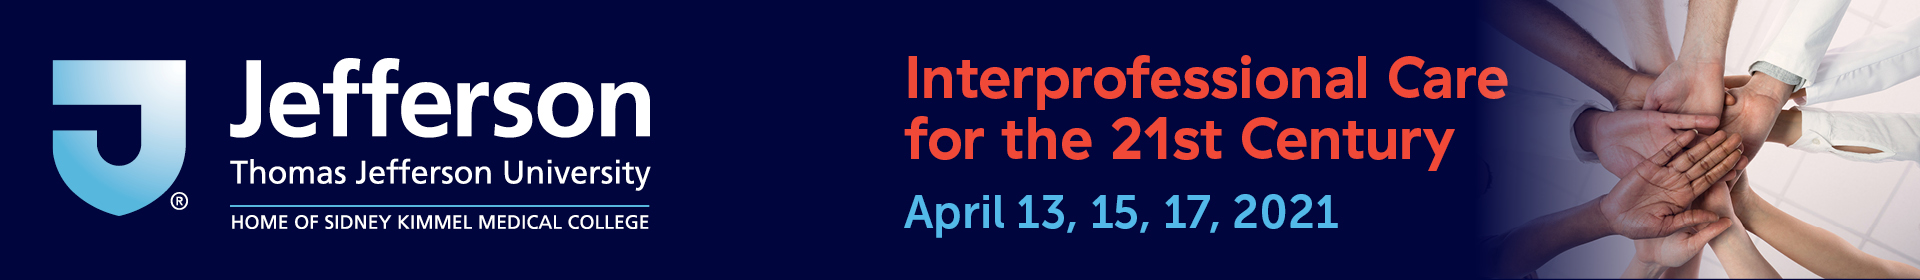 Interprofessional Care for the 21st Century Event Banner